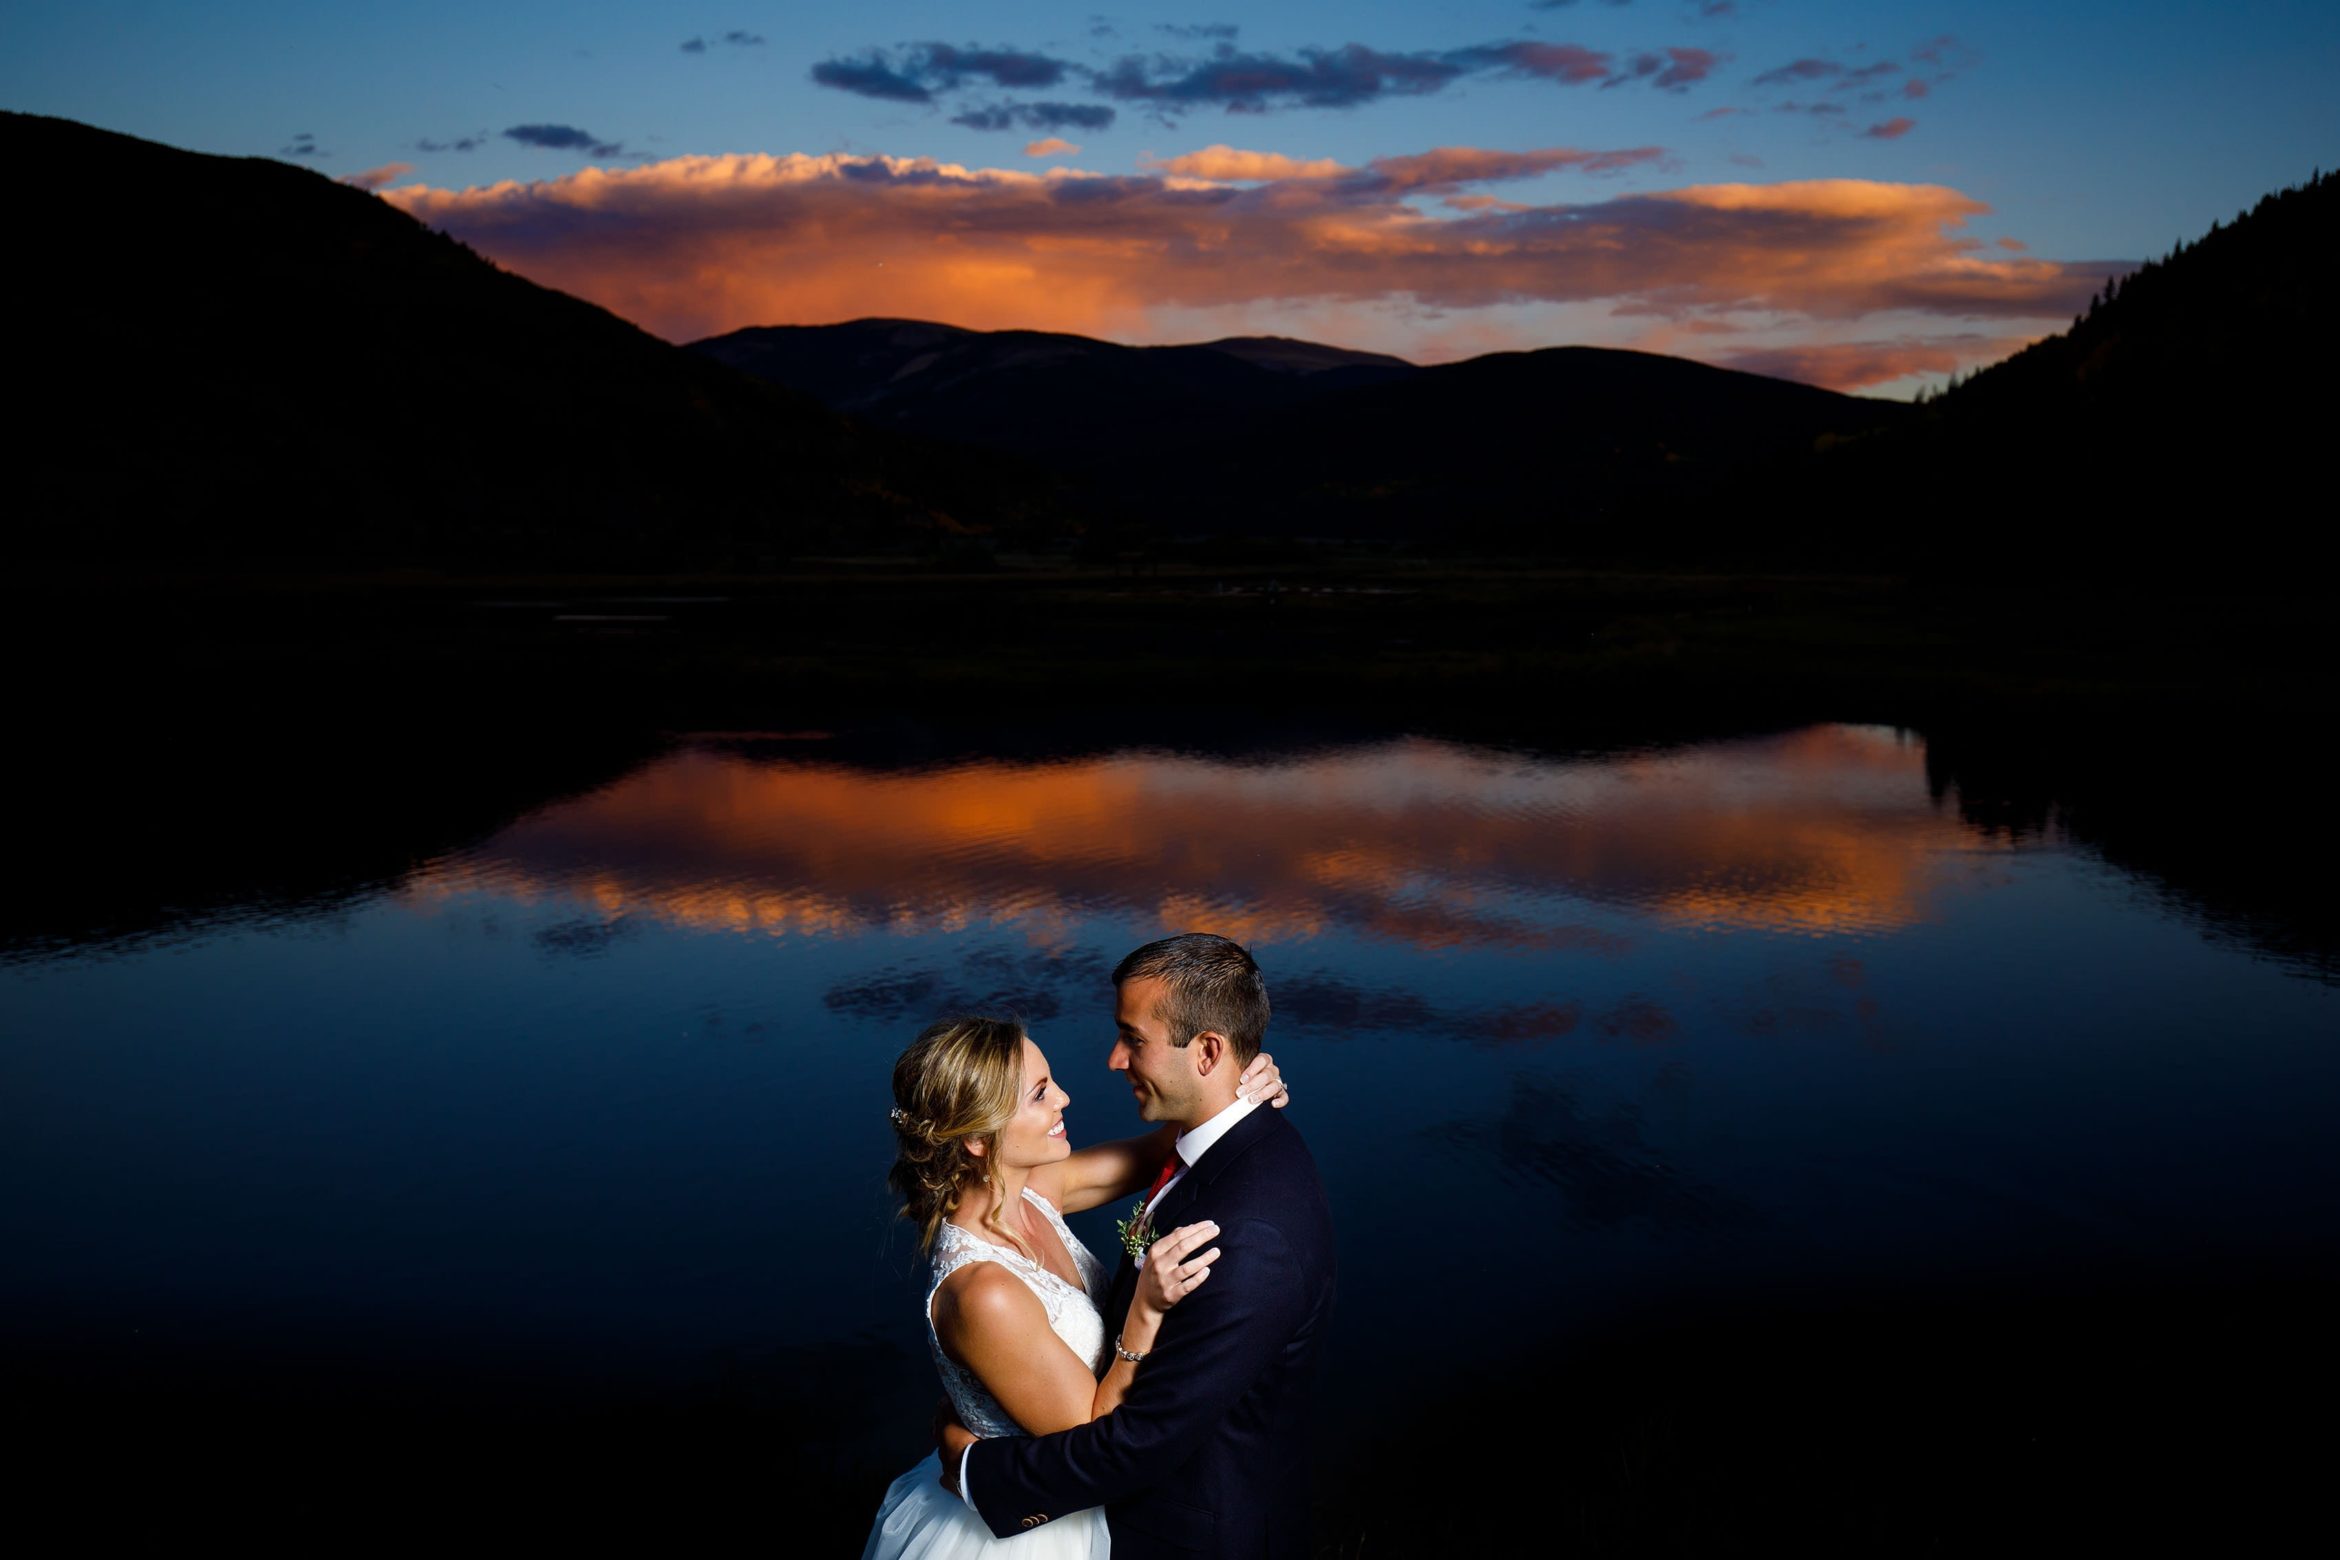 A sunset is reflected on the pond at Camp Hale as the couple poses during their fall wedding